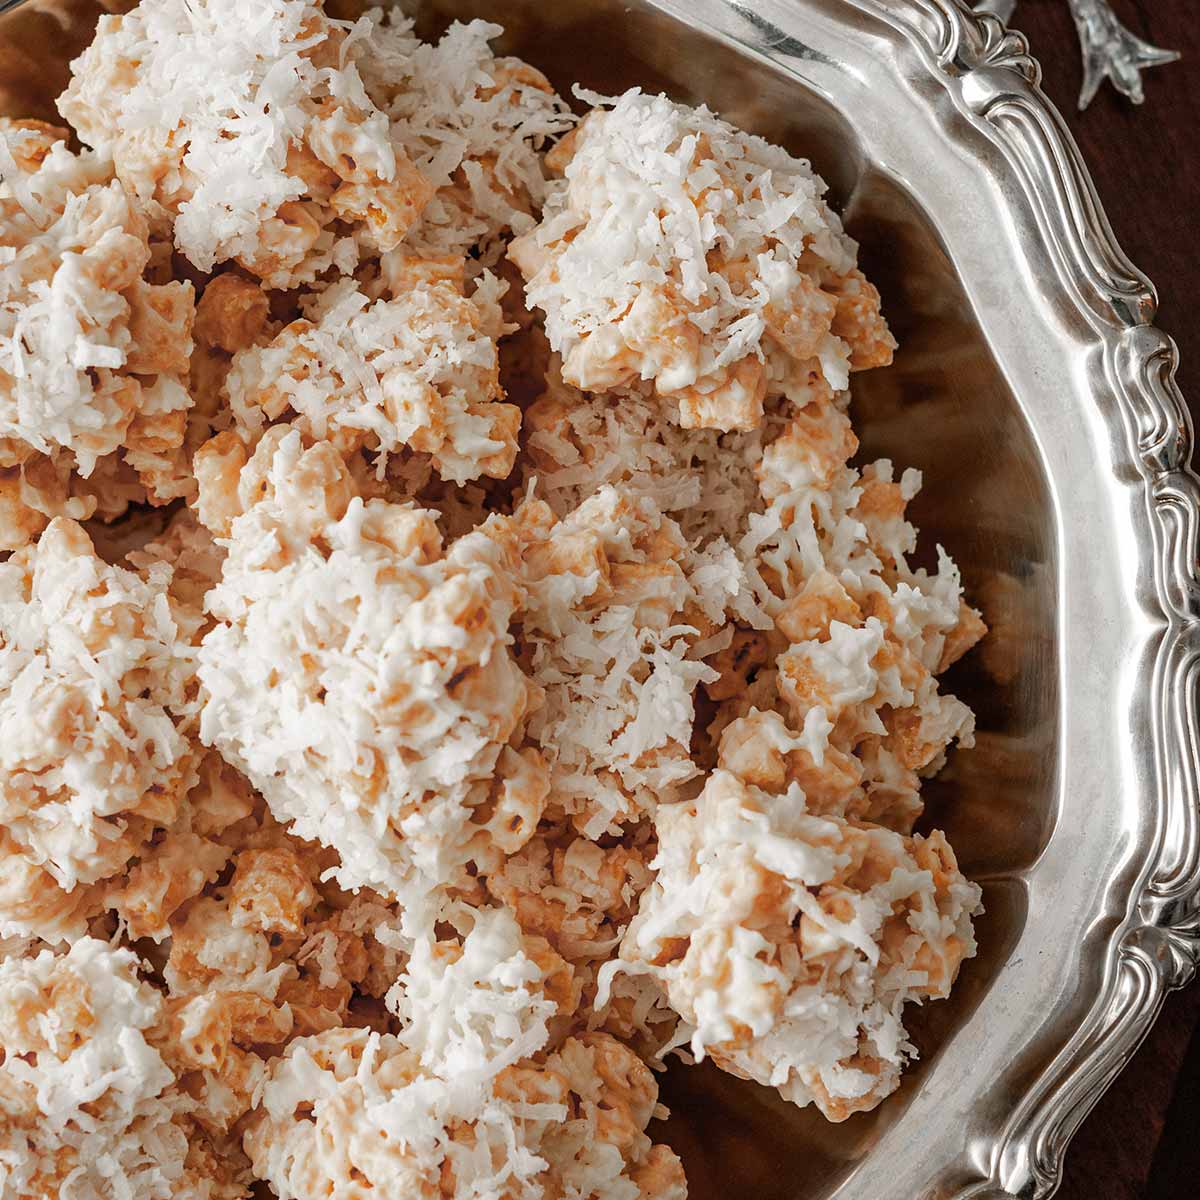 A decorative silver bowl full of coconut cookies.